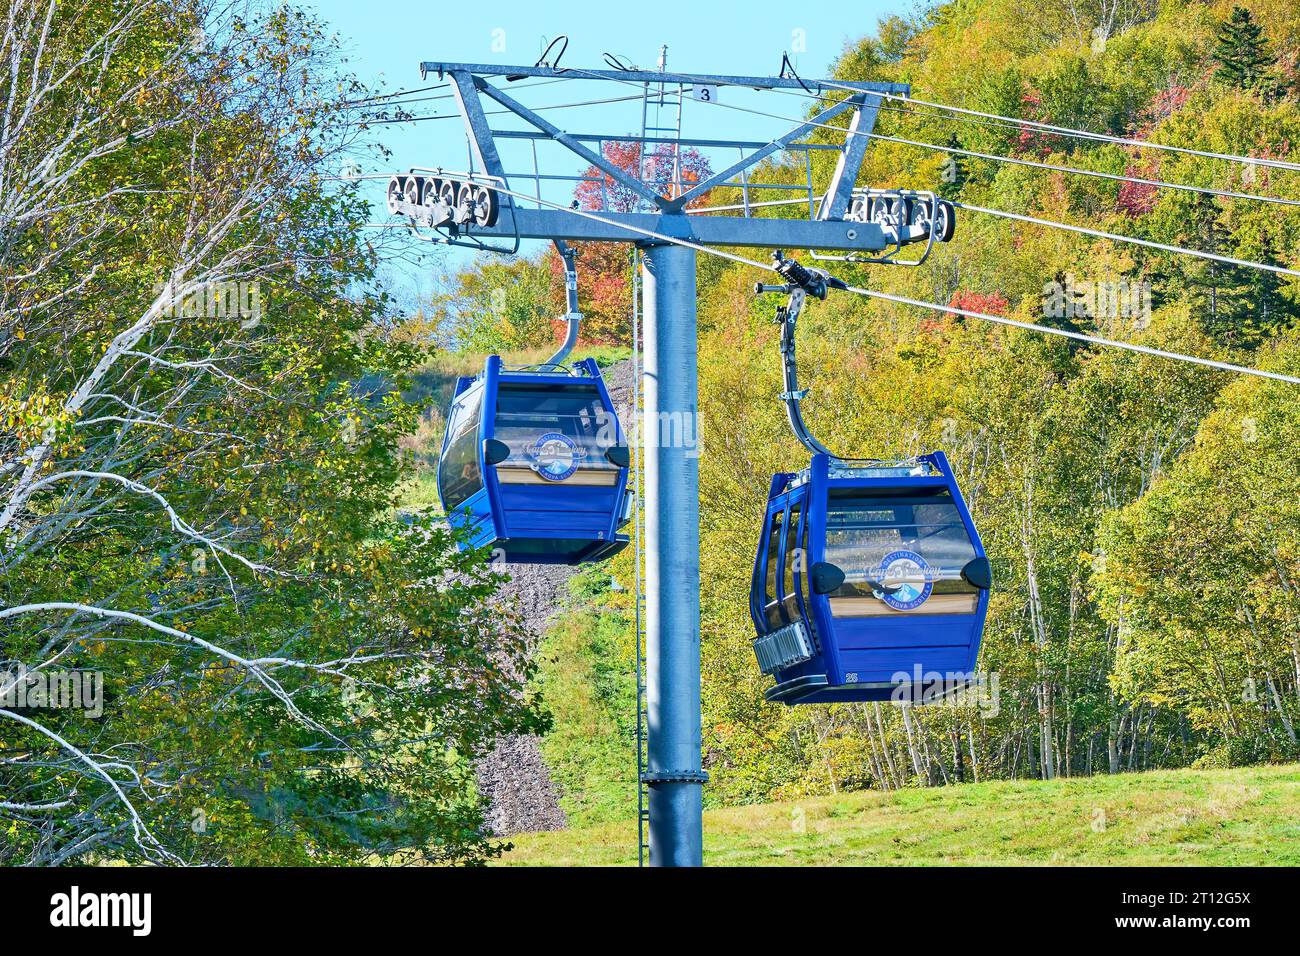 Cablecars take visitors to the top of the Cape Breton Highlands where they can enjoys beautiful views of the Atlantic Ocean and Cape Smokey. Stock Photo